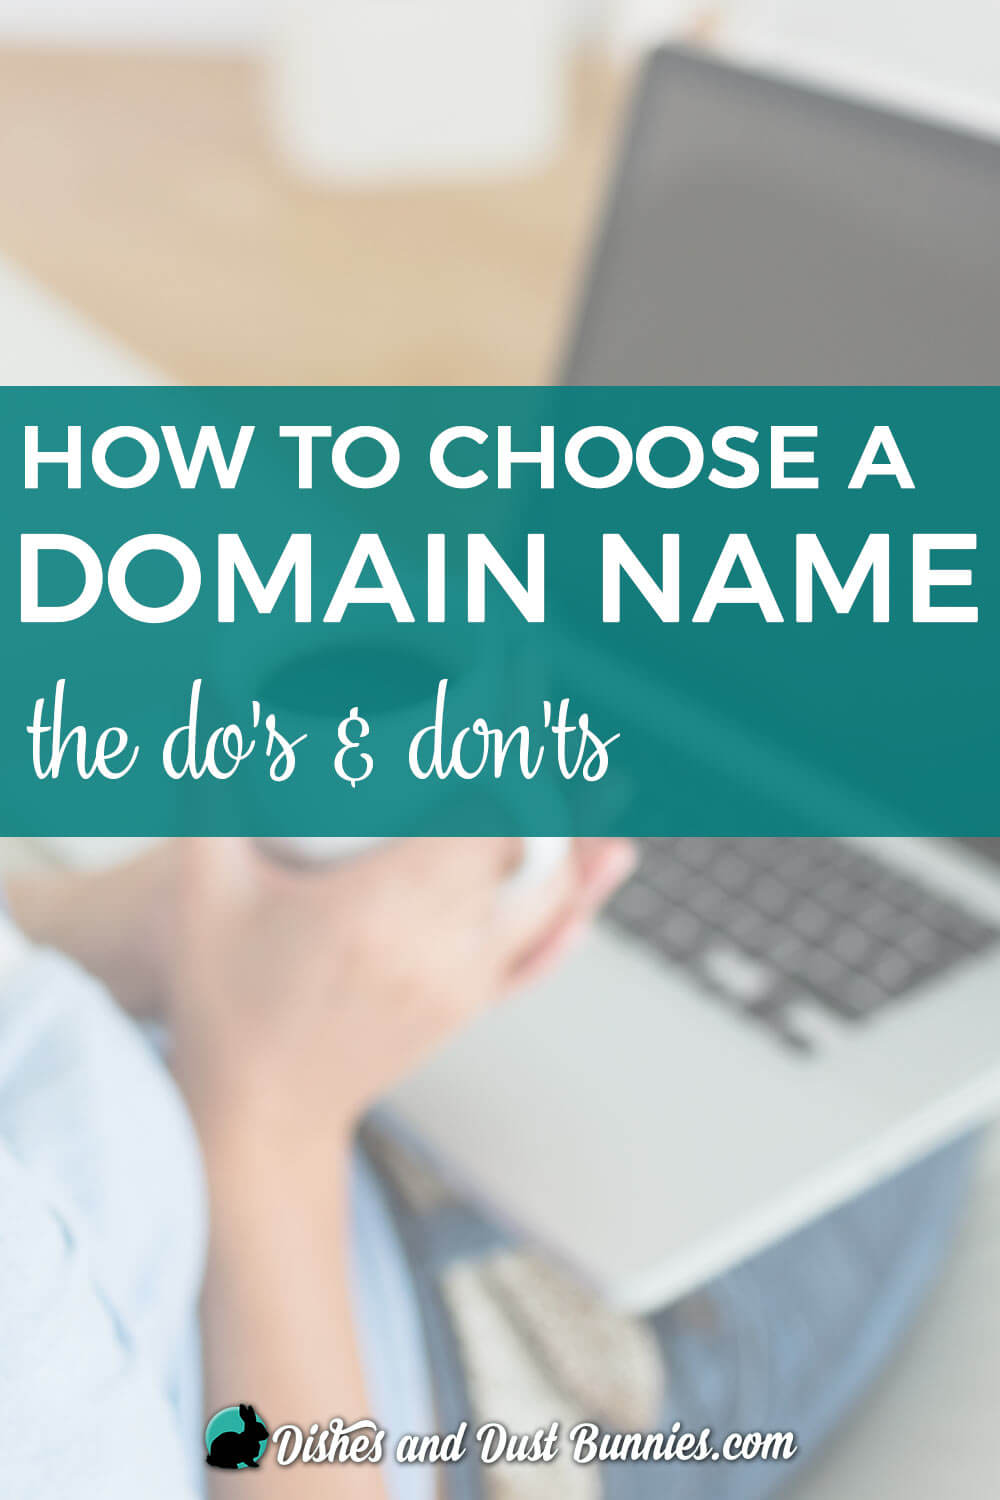 How to Choose a Domain Name for your Blog - from dishesanddustbunnies.com